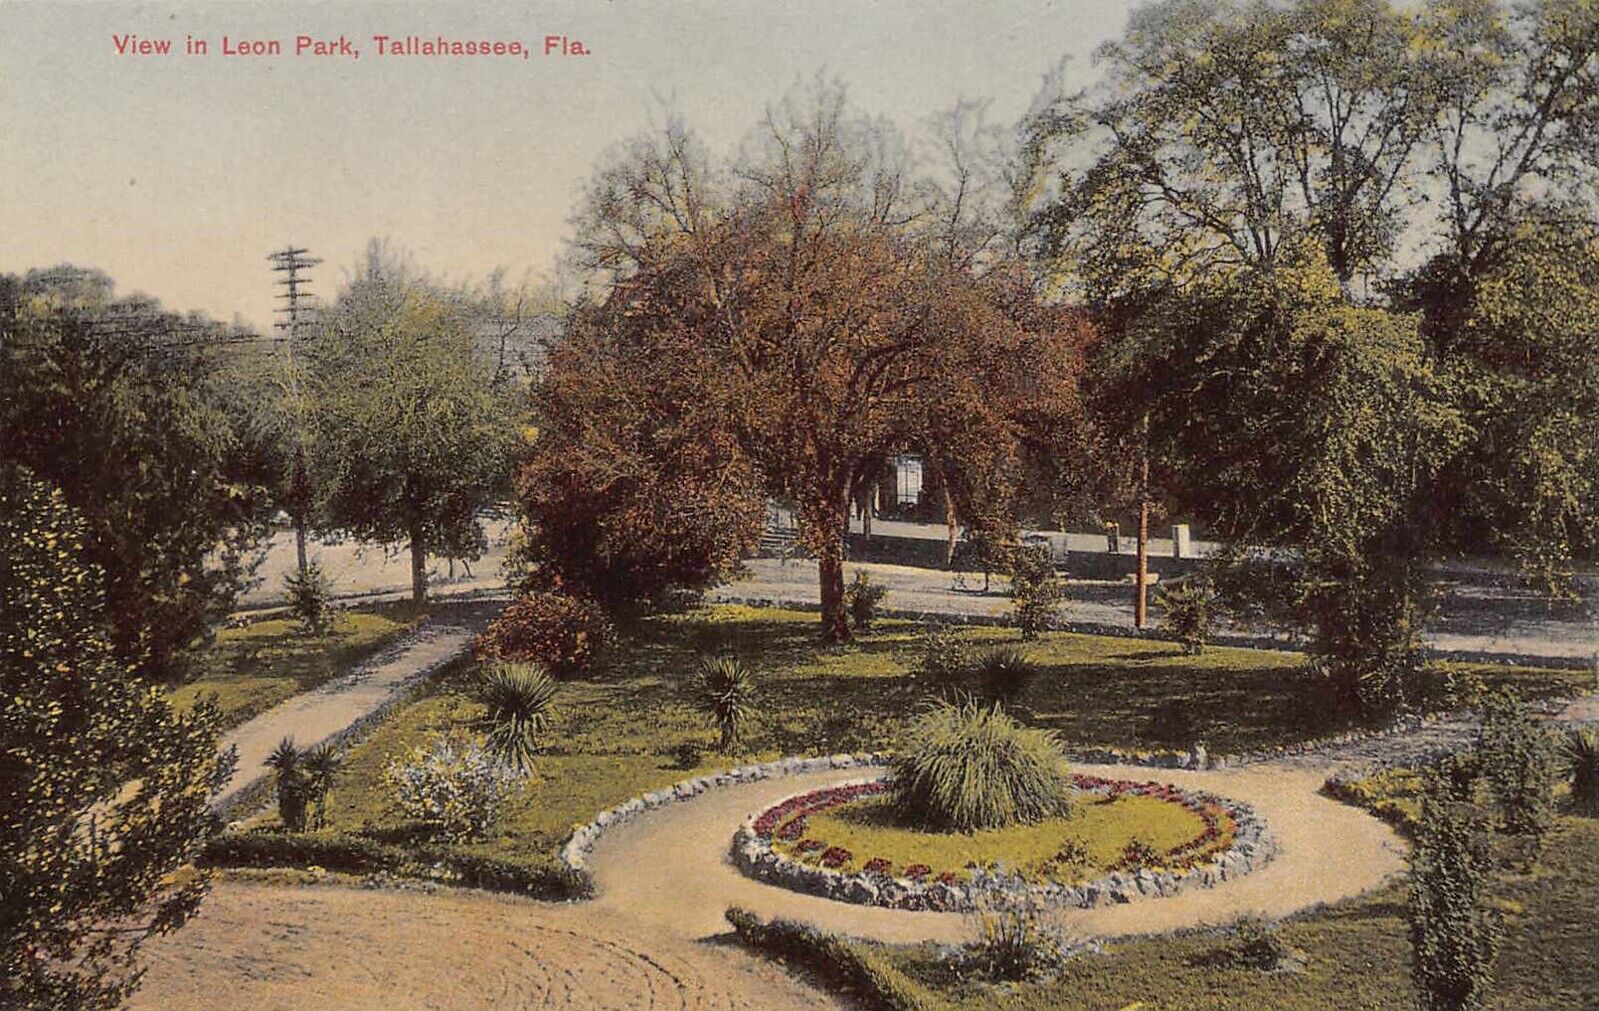 FL - 1900’s VERY RARE View in Leon Park in Tallahassee, FLA - Leon County